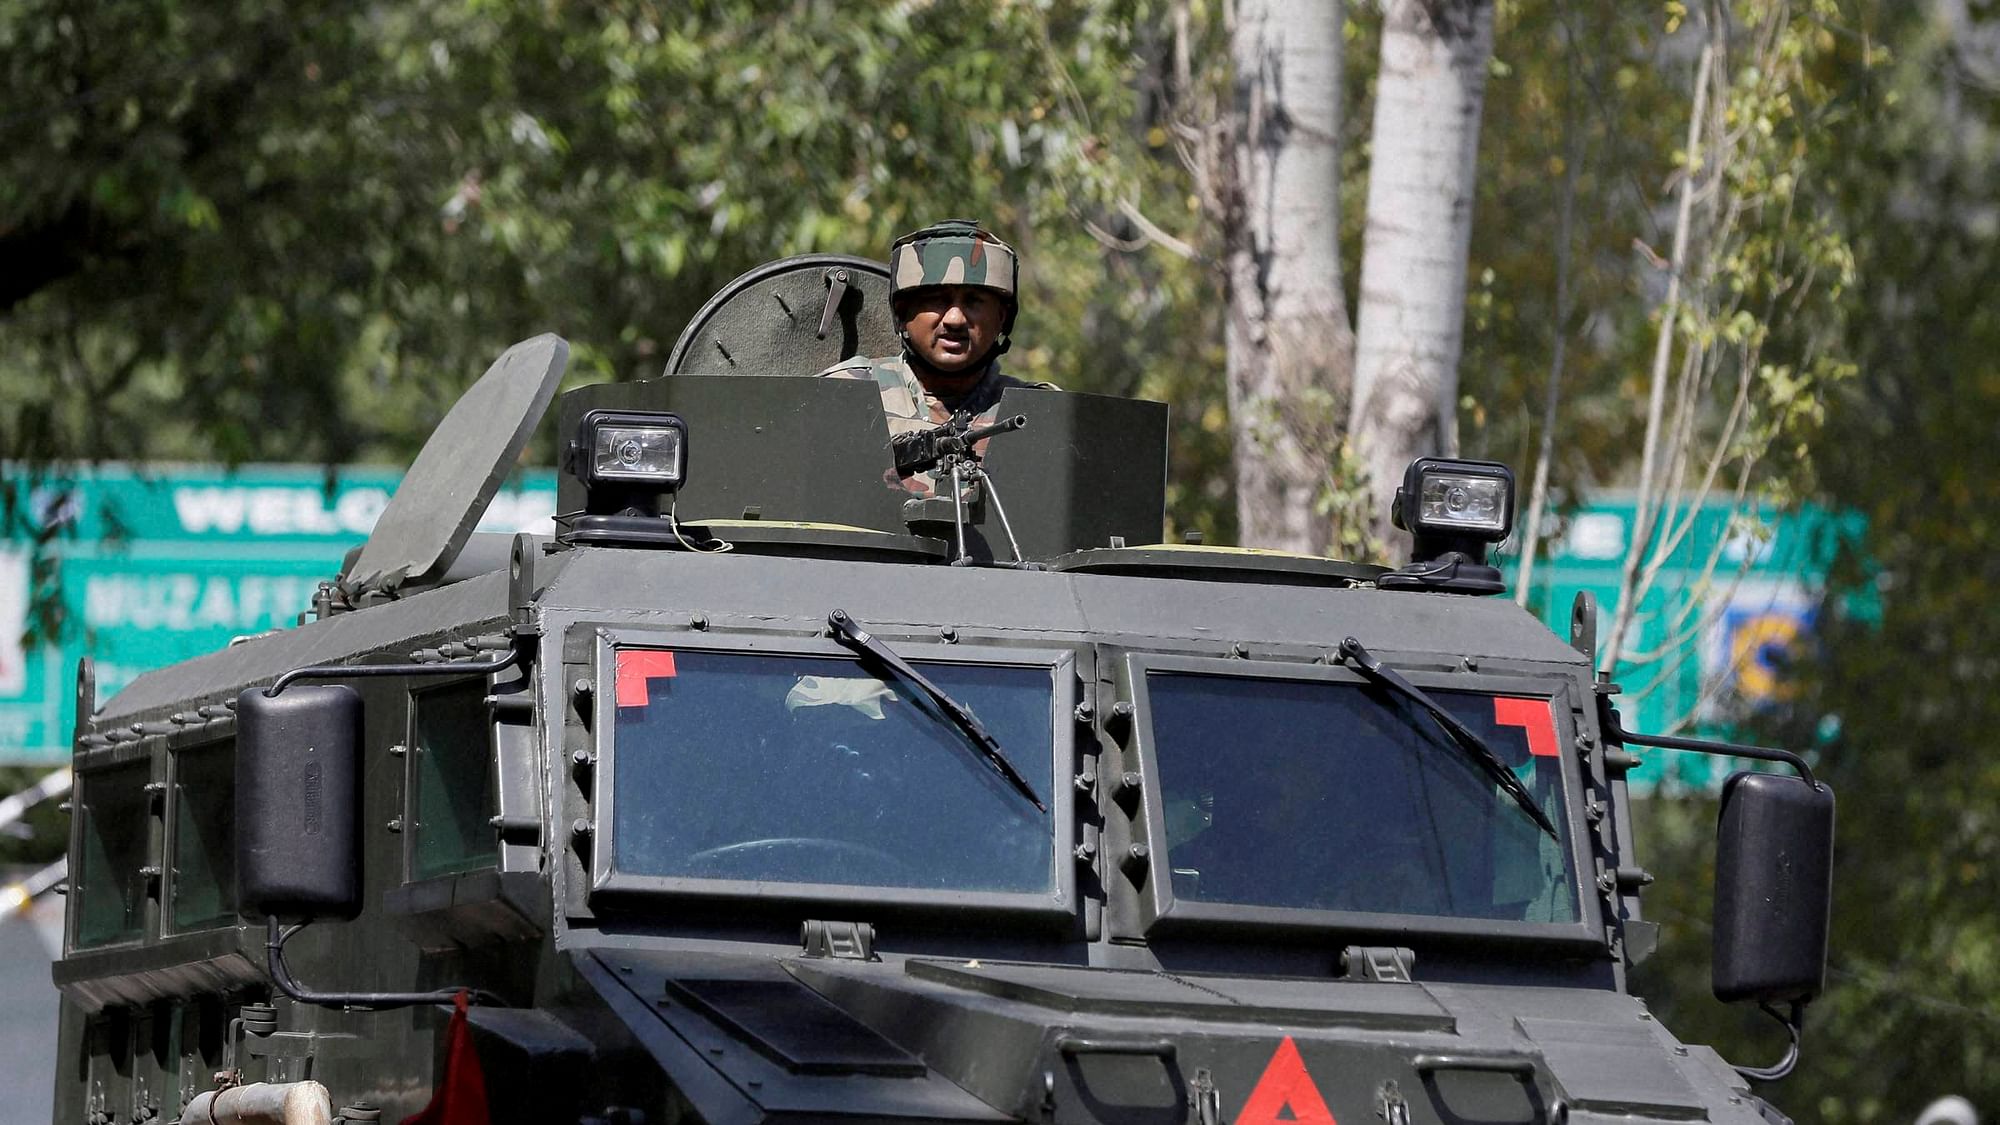 The attack in Uri resulted in the killing of 18 soldiers of the Indian army. (Photo: PTI)